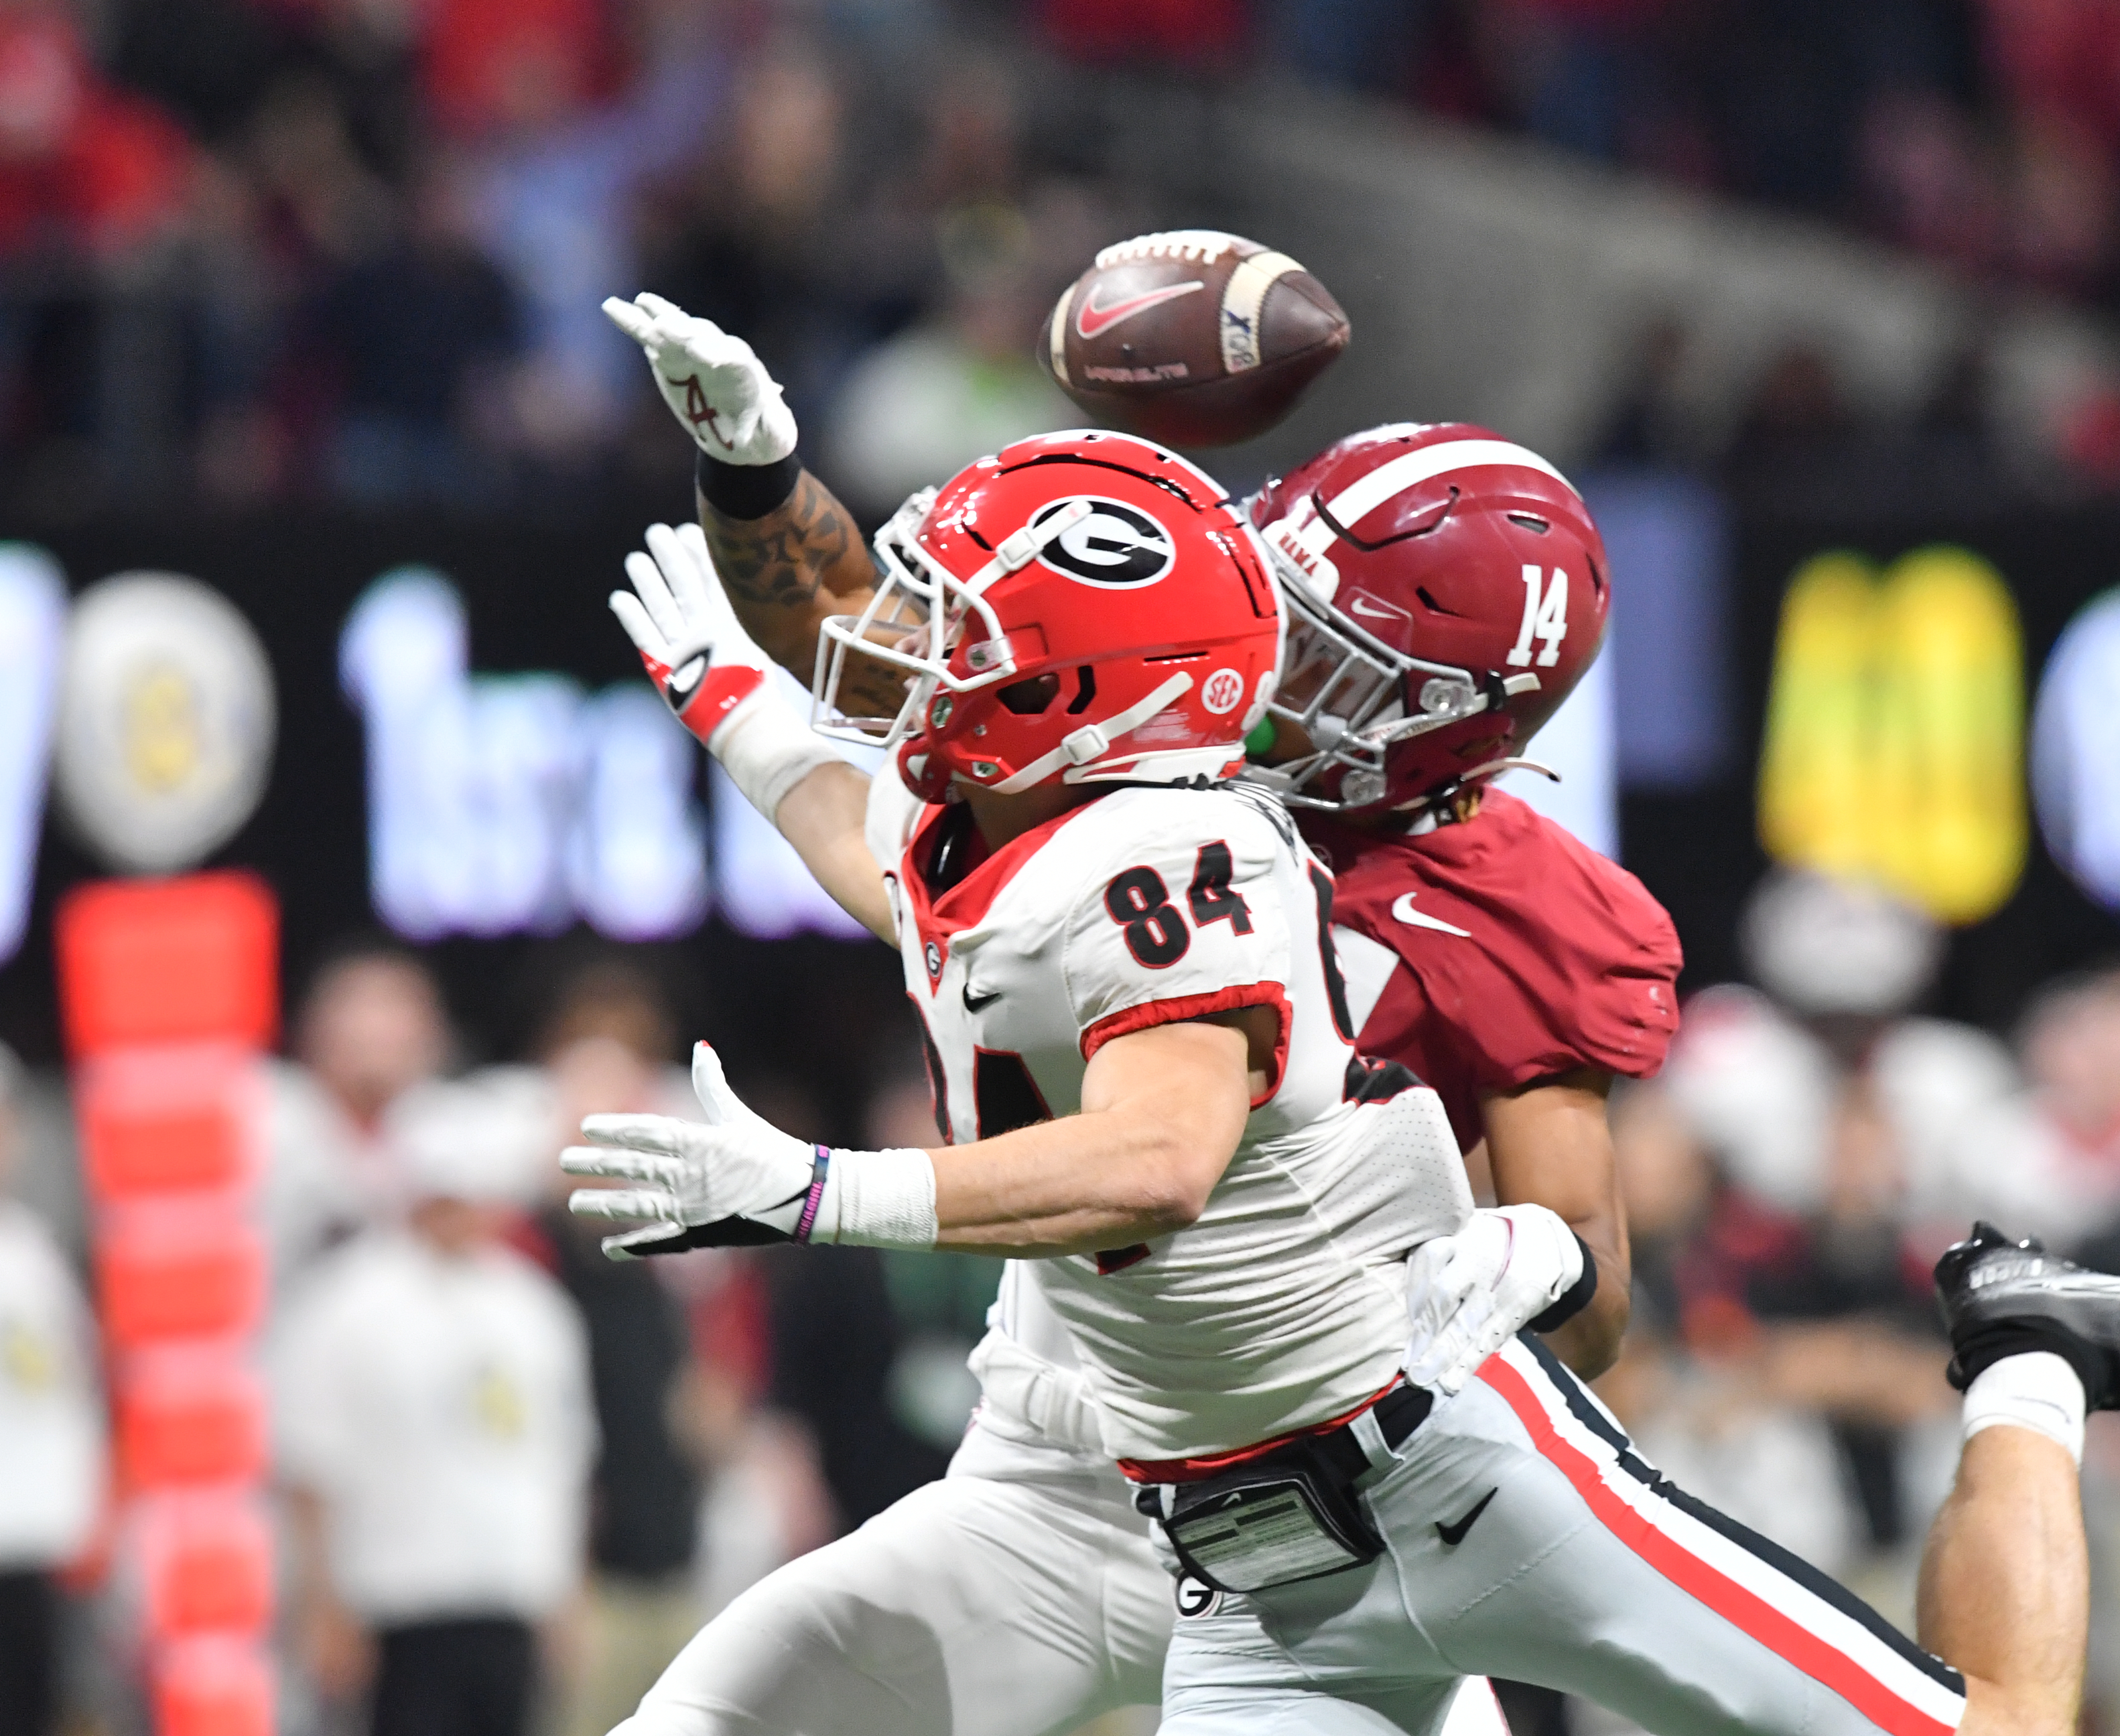 Alabamas Brian Branch, Jordan Battle are top safeties in the NFL draft image pic